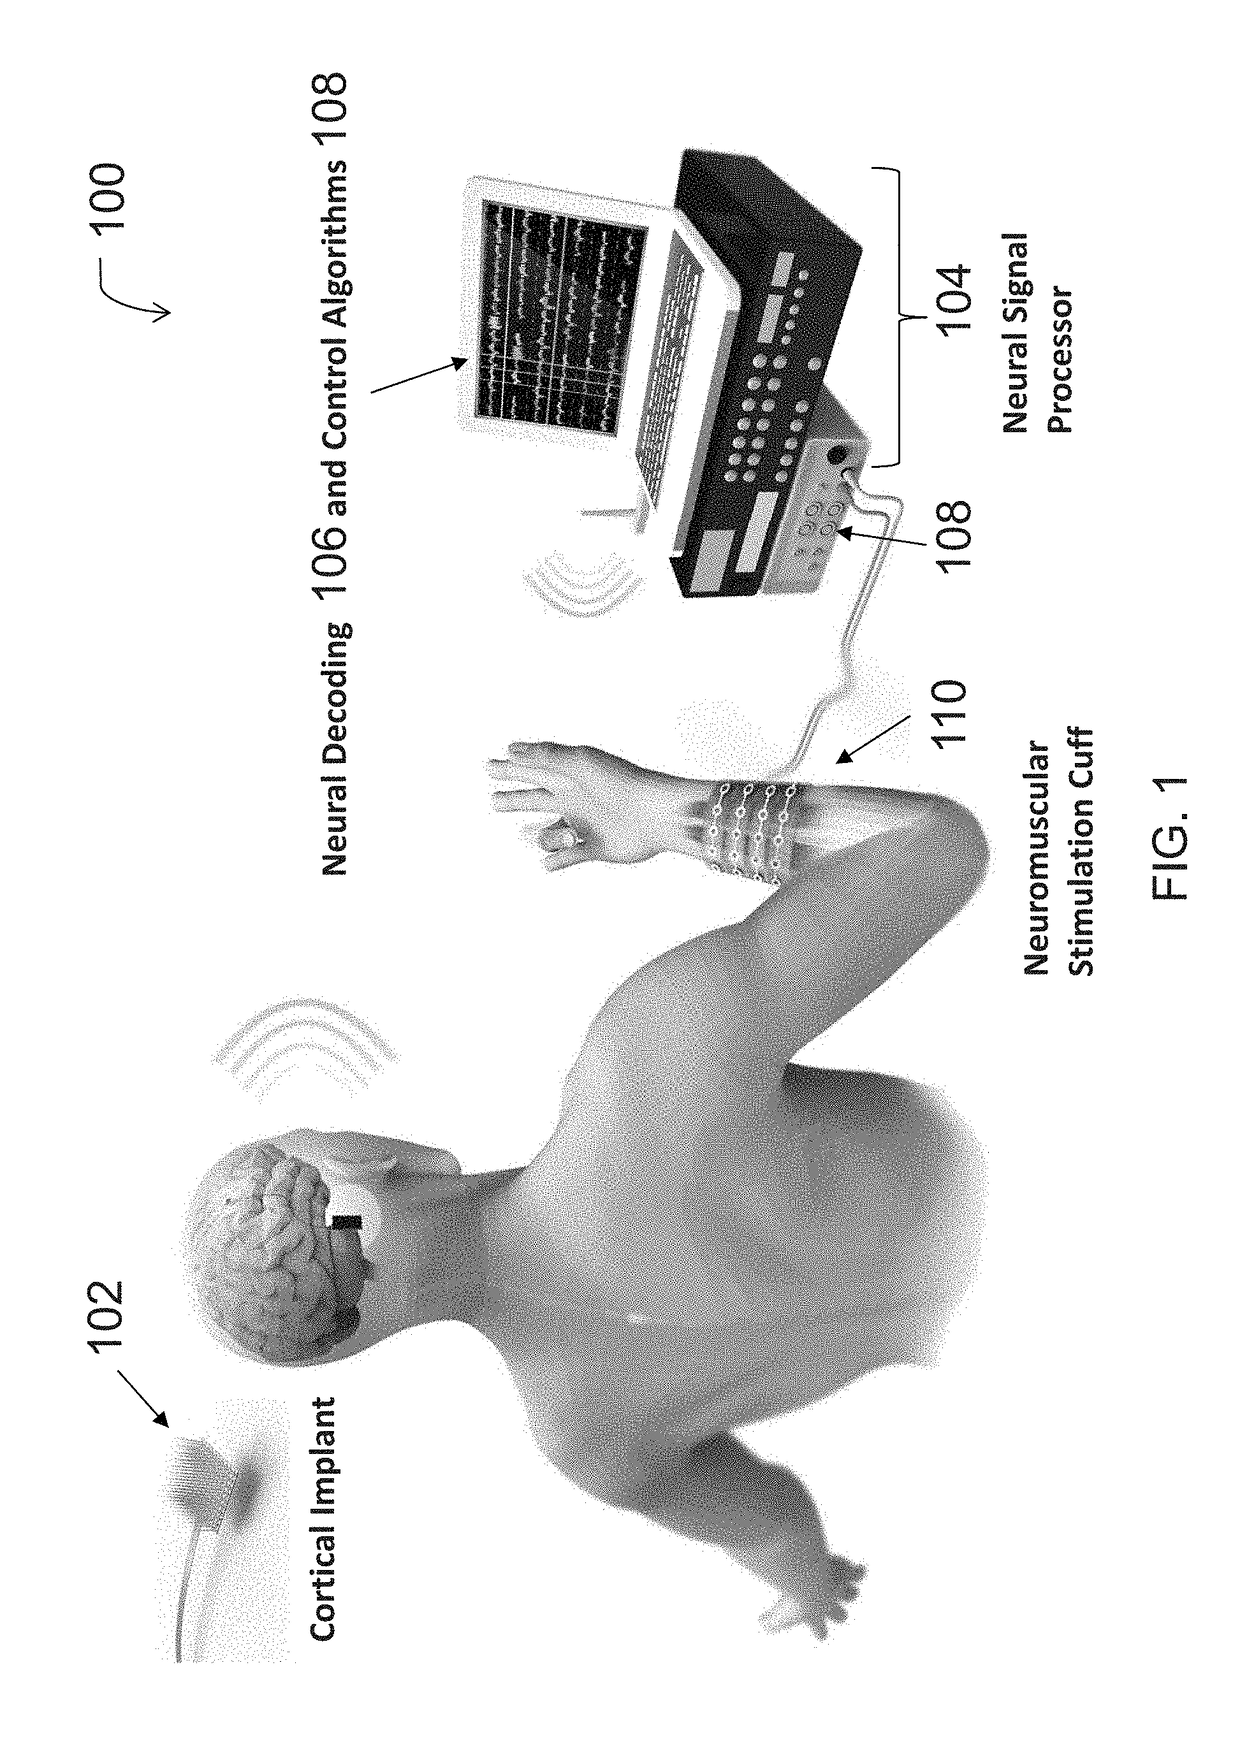 Neural sleeve for neuromuscular stimulation, sensing and recording